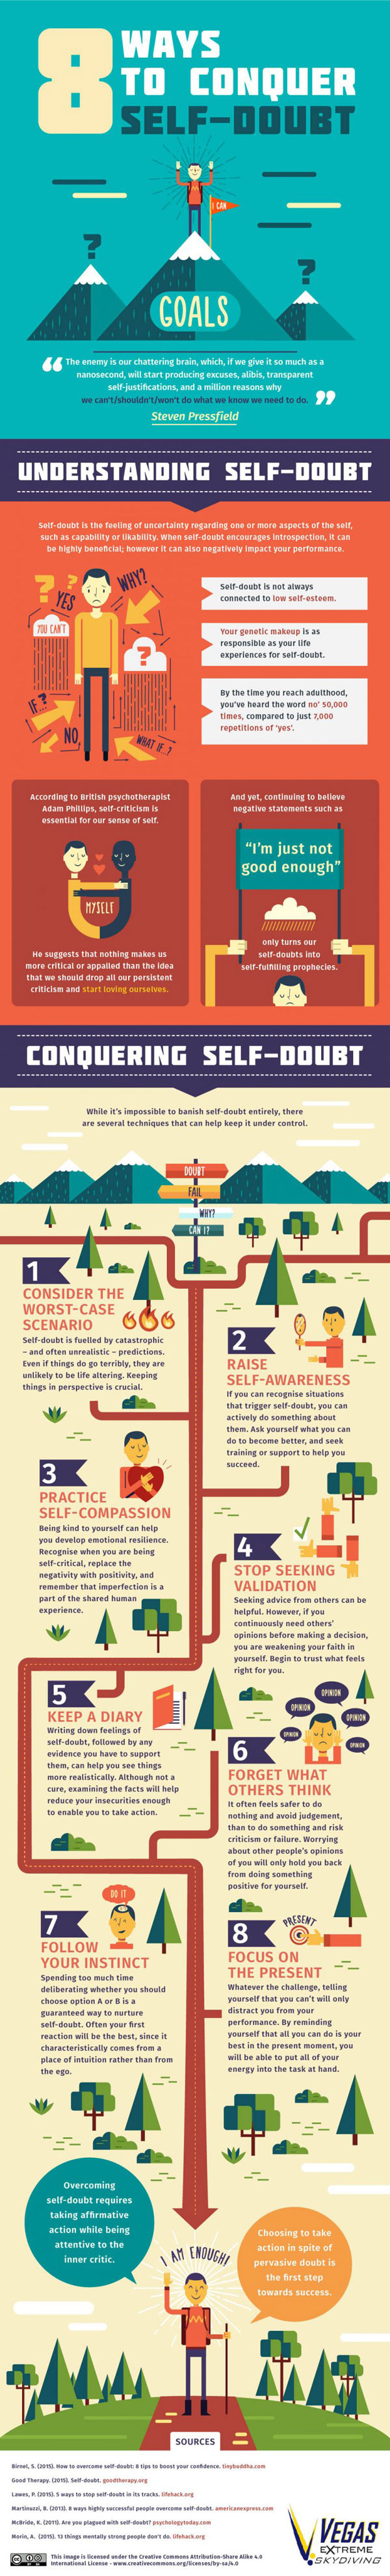 8 Ways to Conquer Self-Doubt [Infographic] - Best Infographics